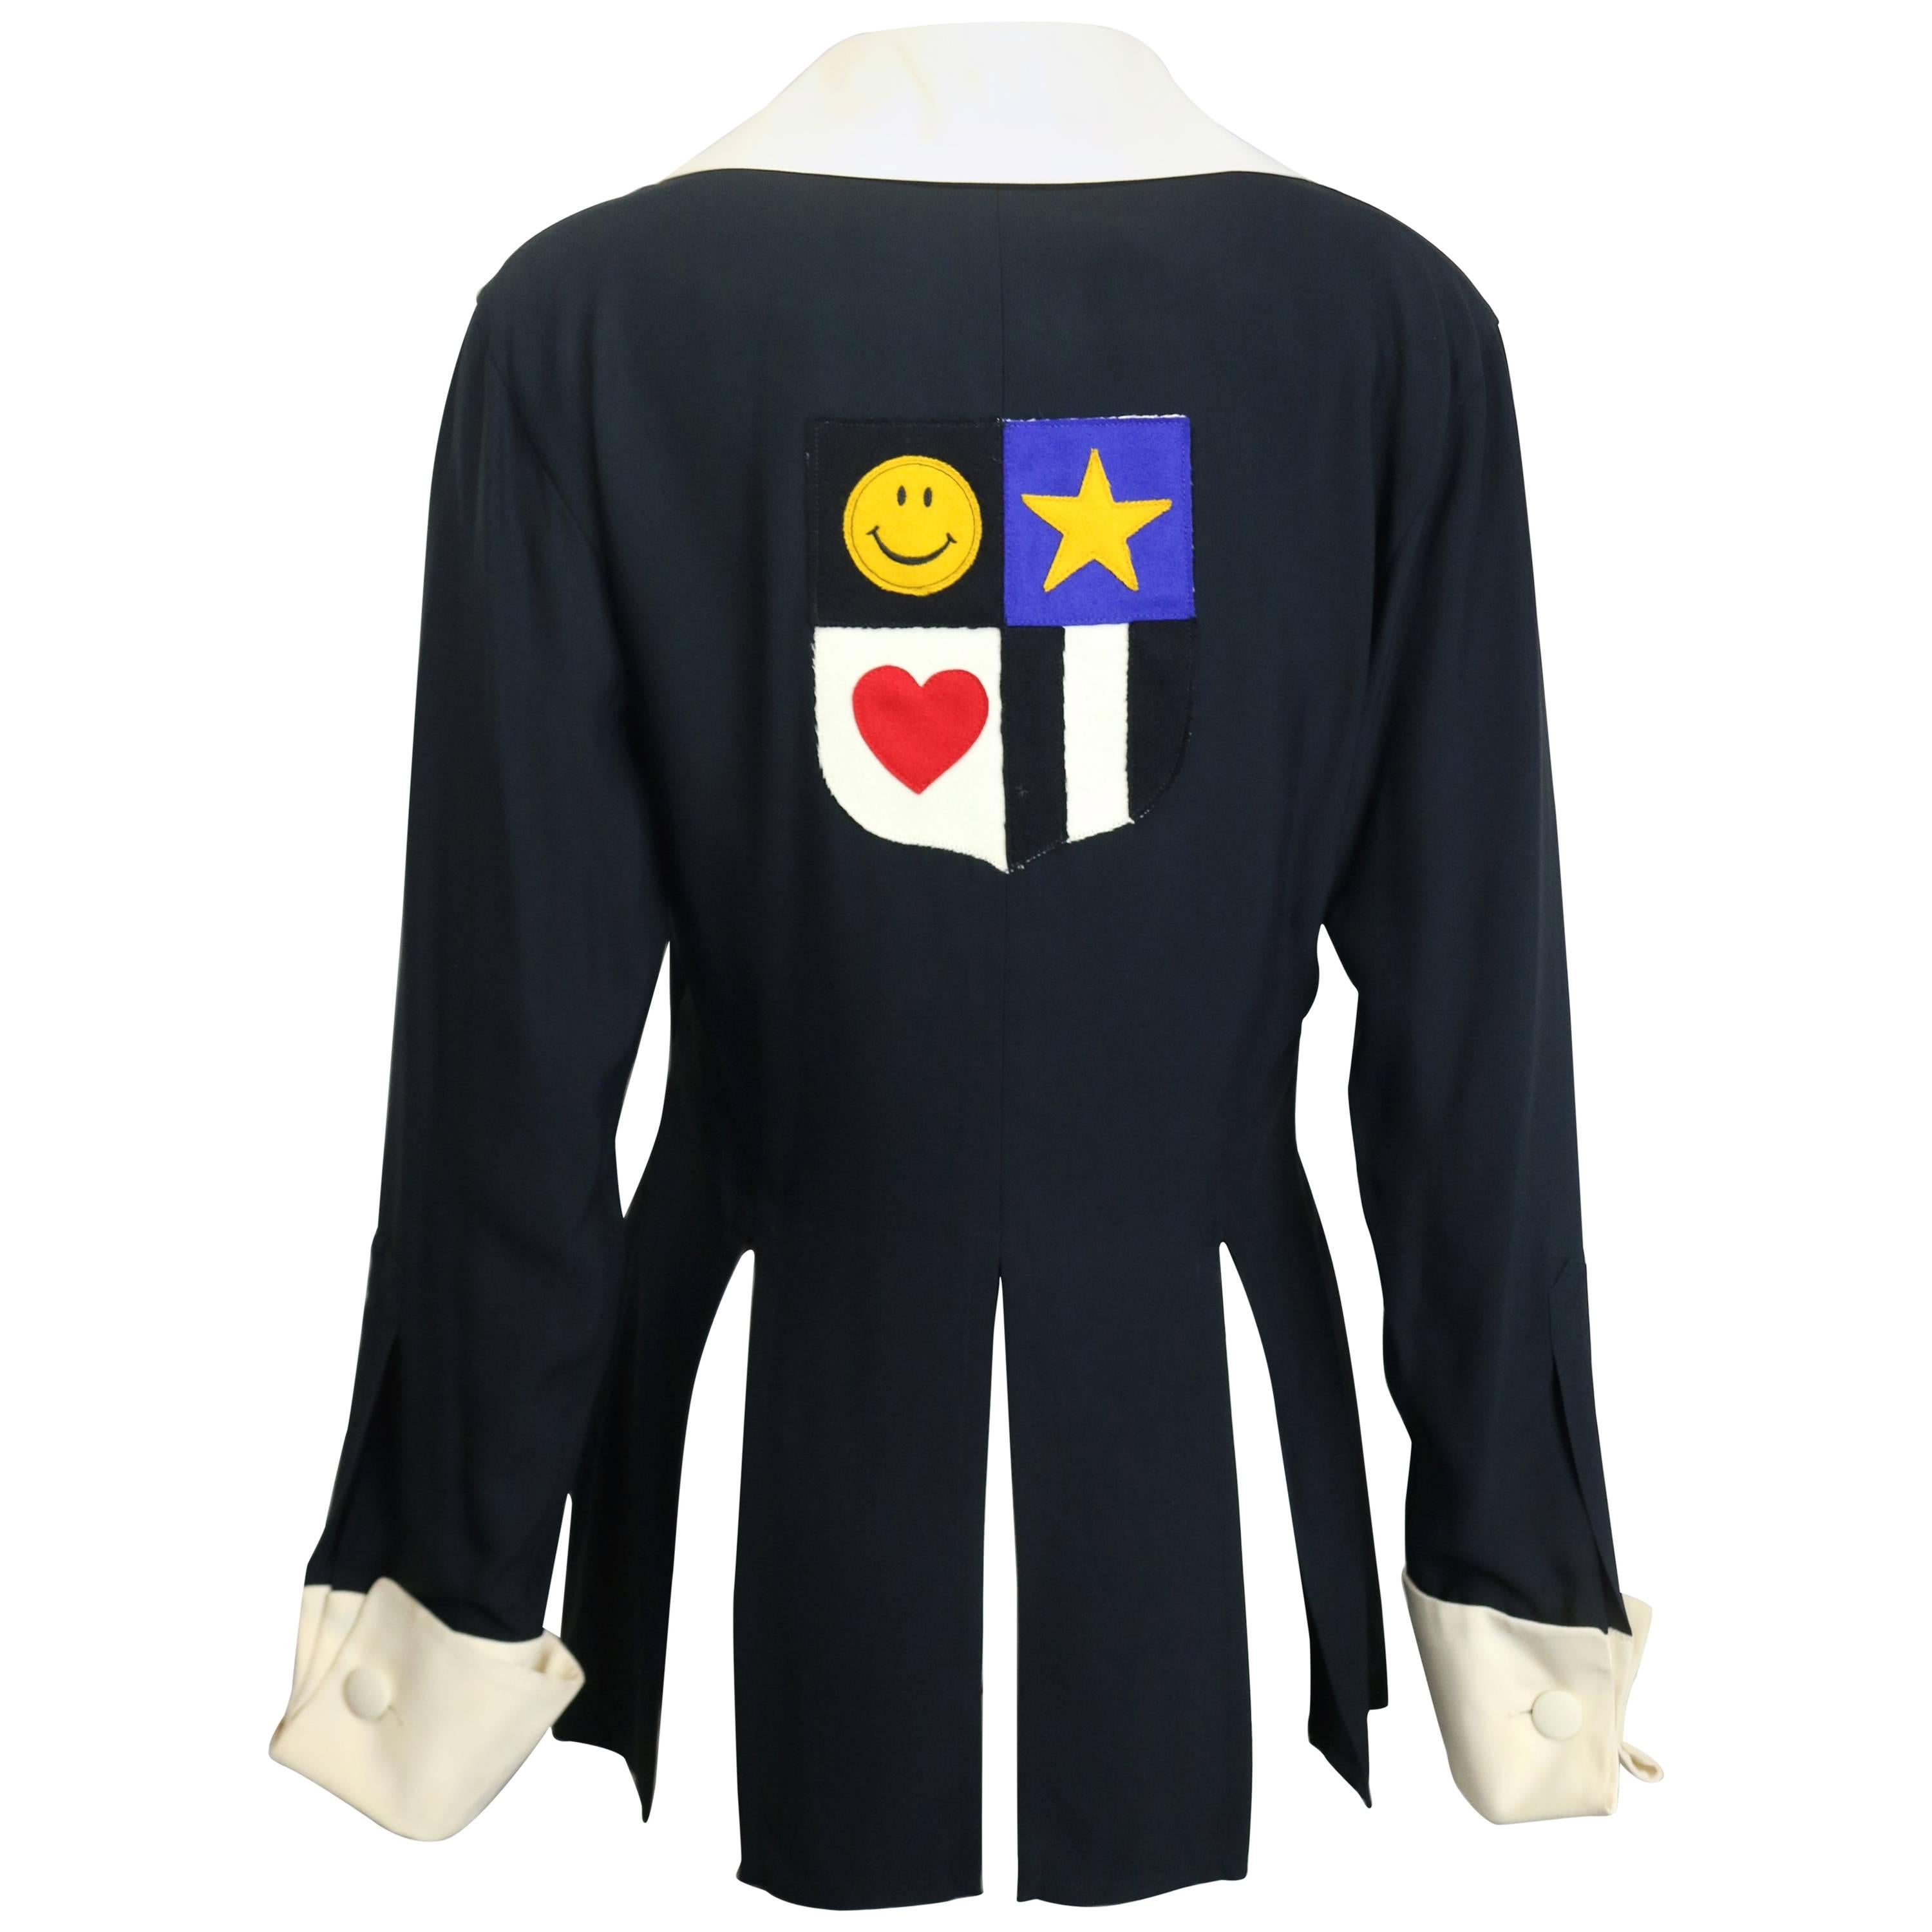 Moschino Couture Black Tunic Shirt with Symbols 